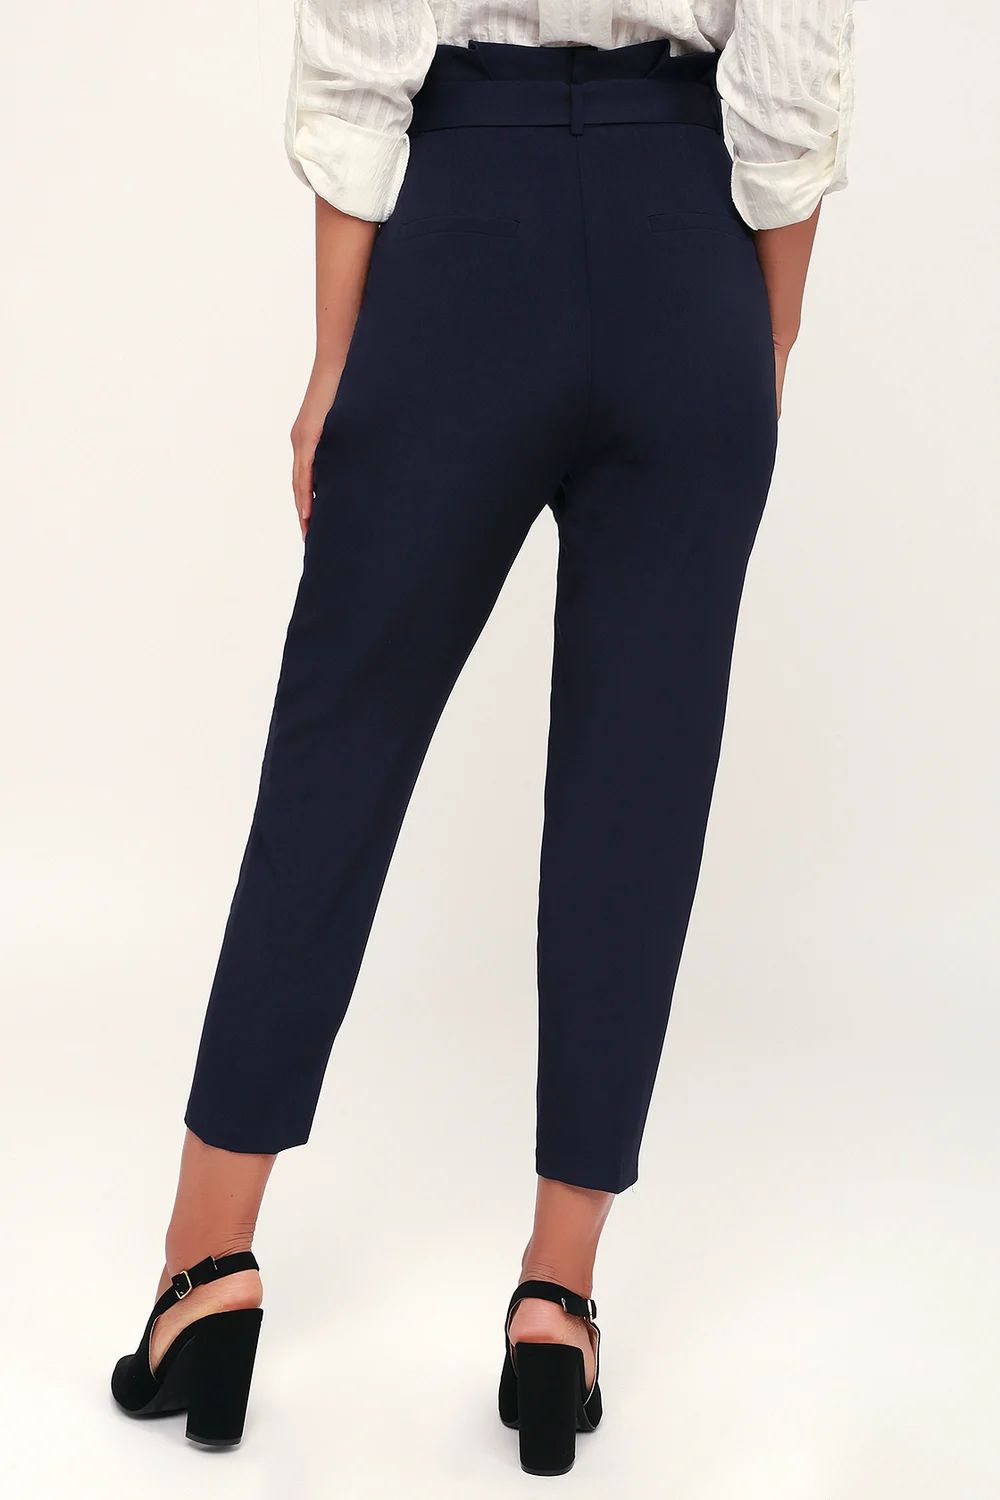 With Confidence Navy Blue Paper Bag Waist Pants | Lulus (US)